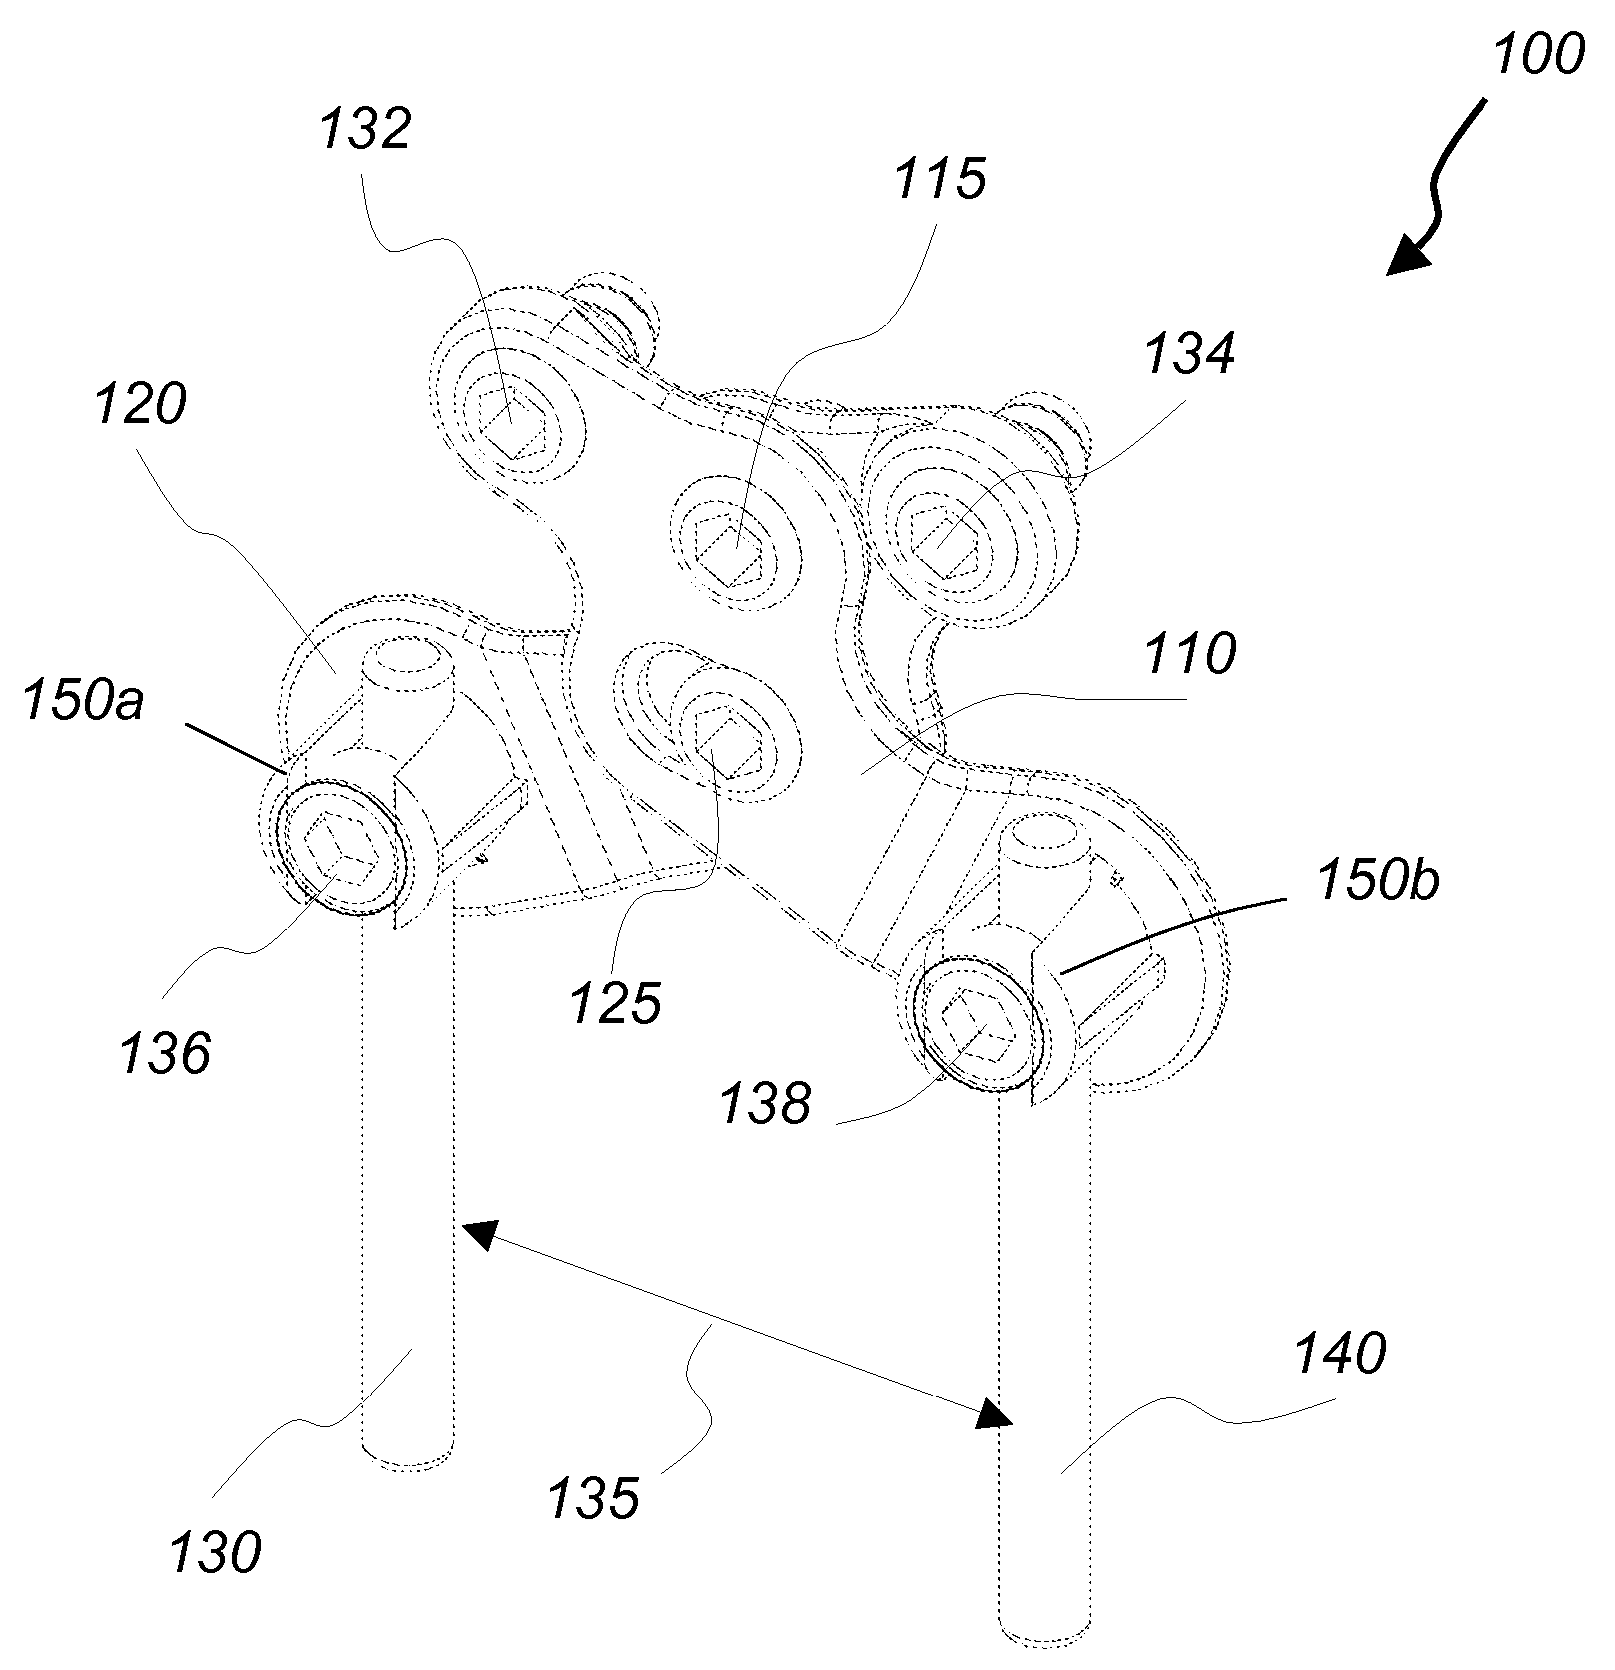 Apparatus and method for spine fixation